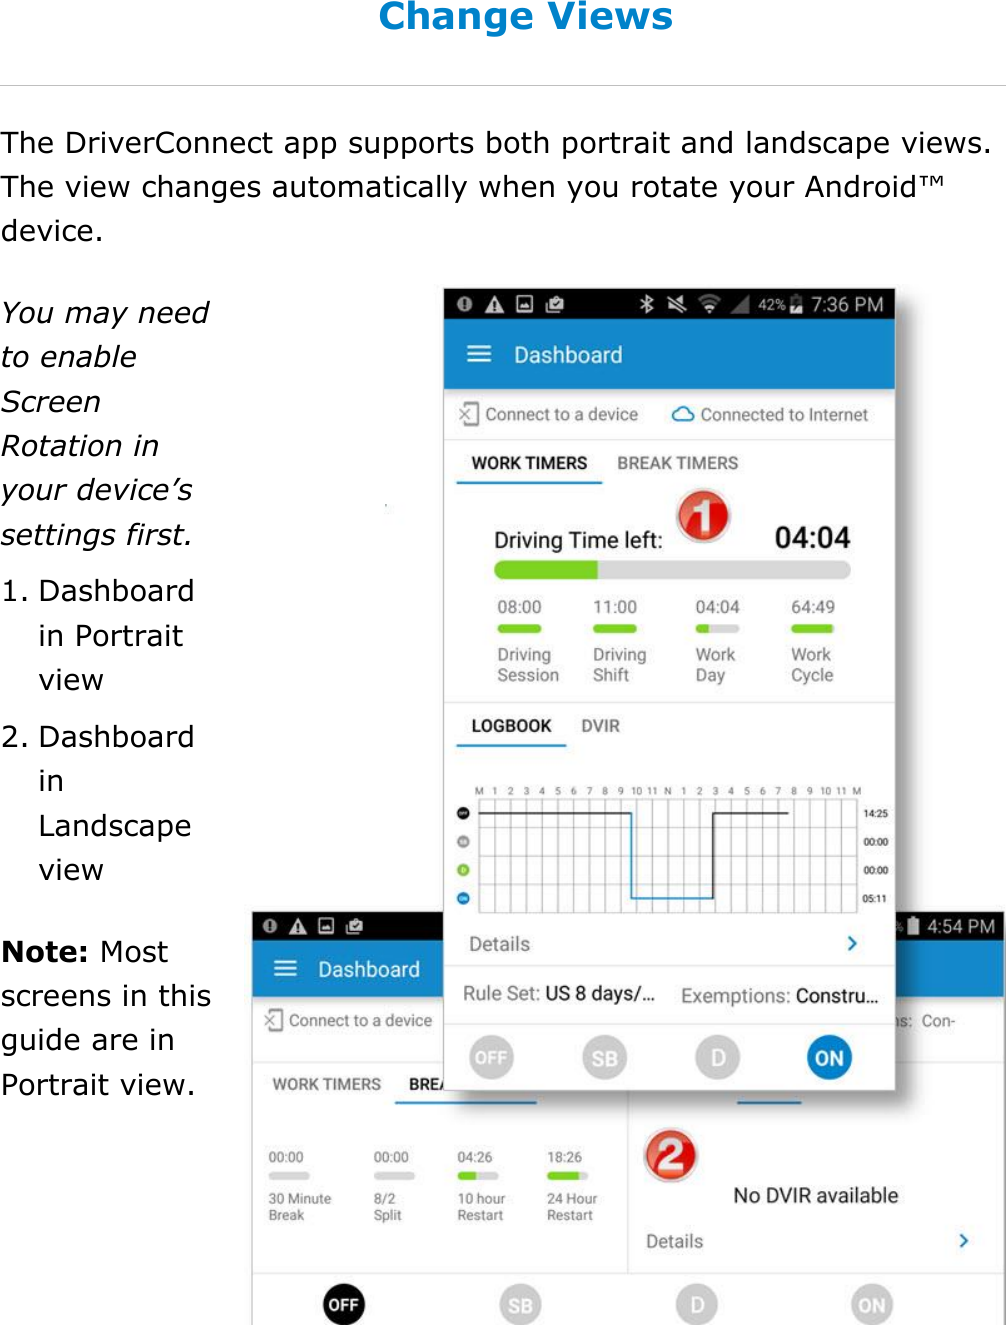 Set My Duty Status DriverConnect User Guide  26 © 2016-2017, Rand McNally, Inc. Change Views The DriverConnect app supports both portrait and landscape views. The view changes automatically when you rotate your Android™ device.  You may need to enable Screen Rotation in your device’s settings first. 1. Dashboard in Portrait view 2. Dashboard in Landscape view Note: Most screens in this guide are in Portrait view.   